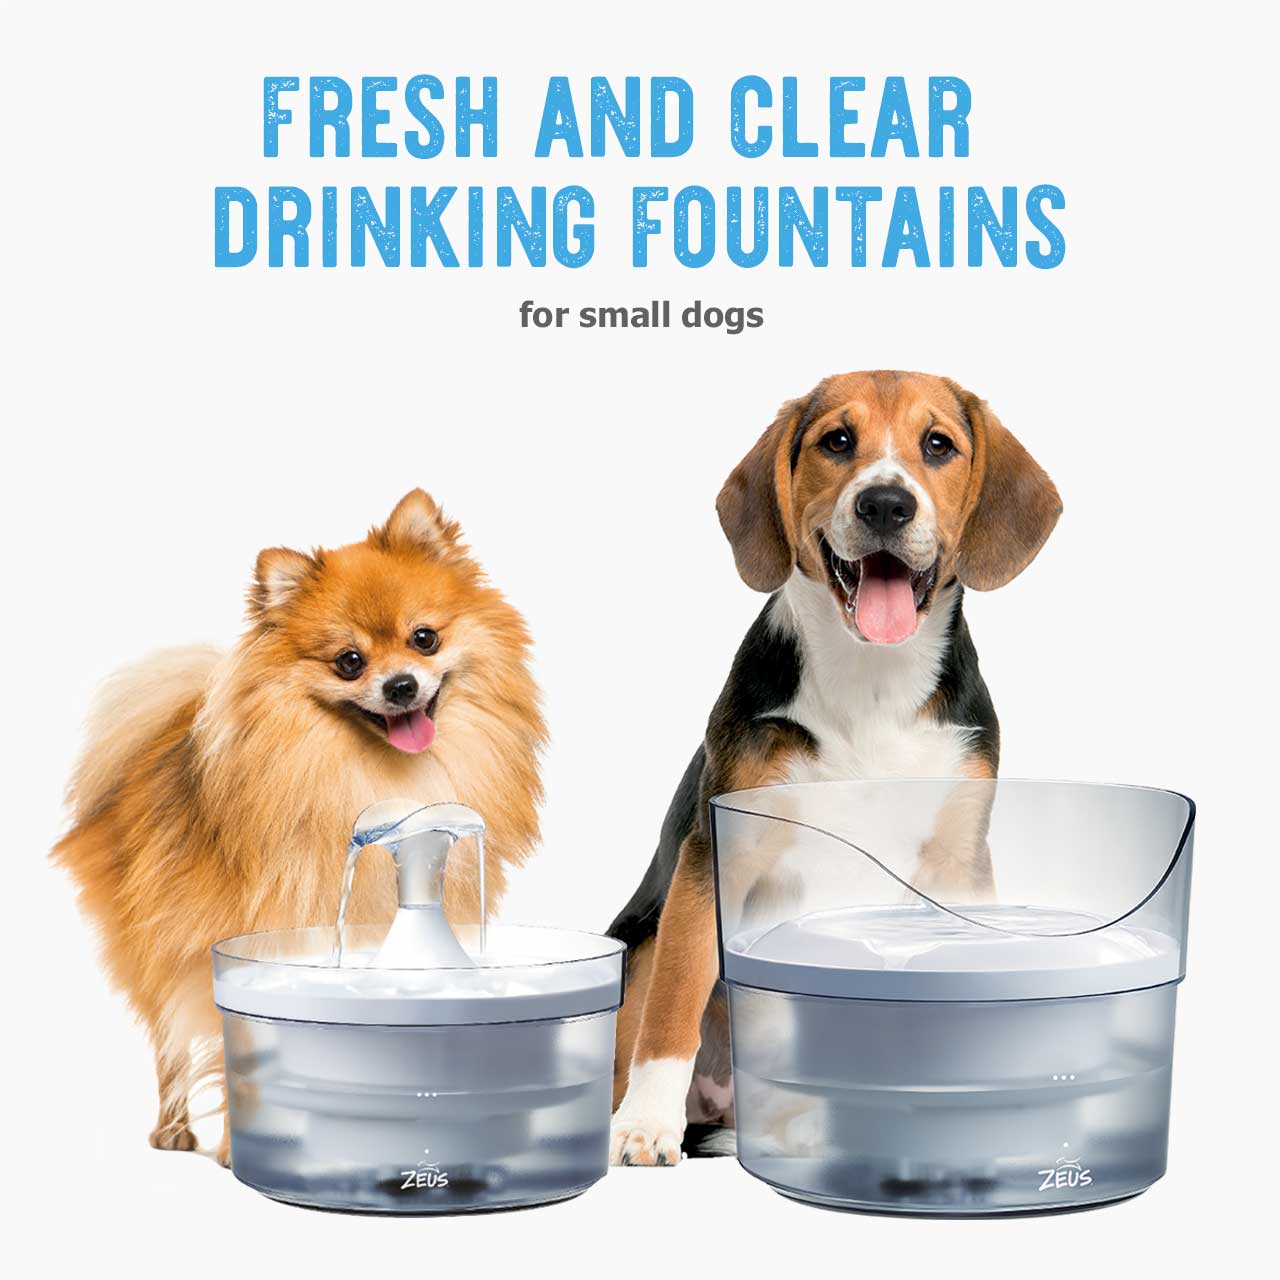 Fresh and Clear Drinking Fountains for small dogs